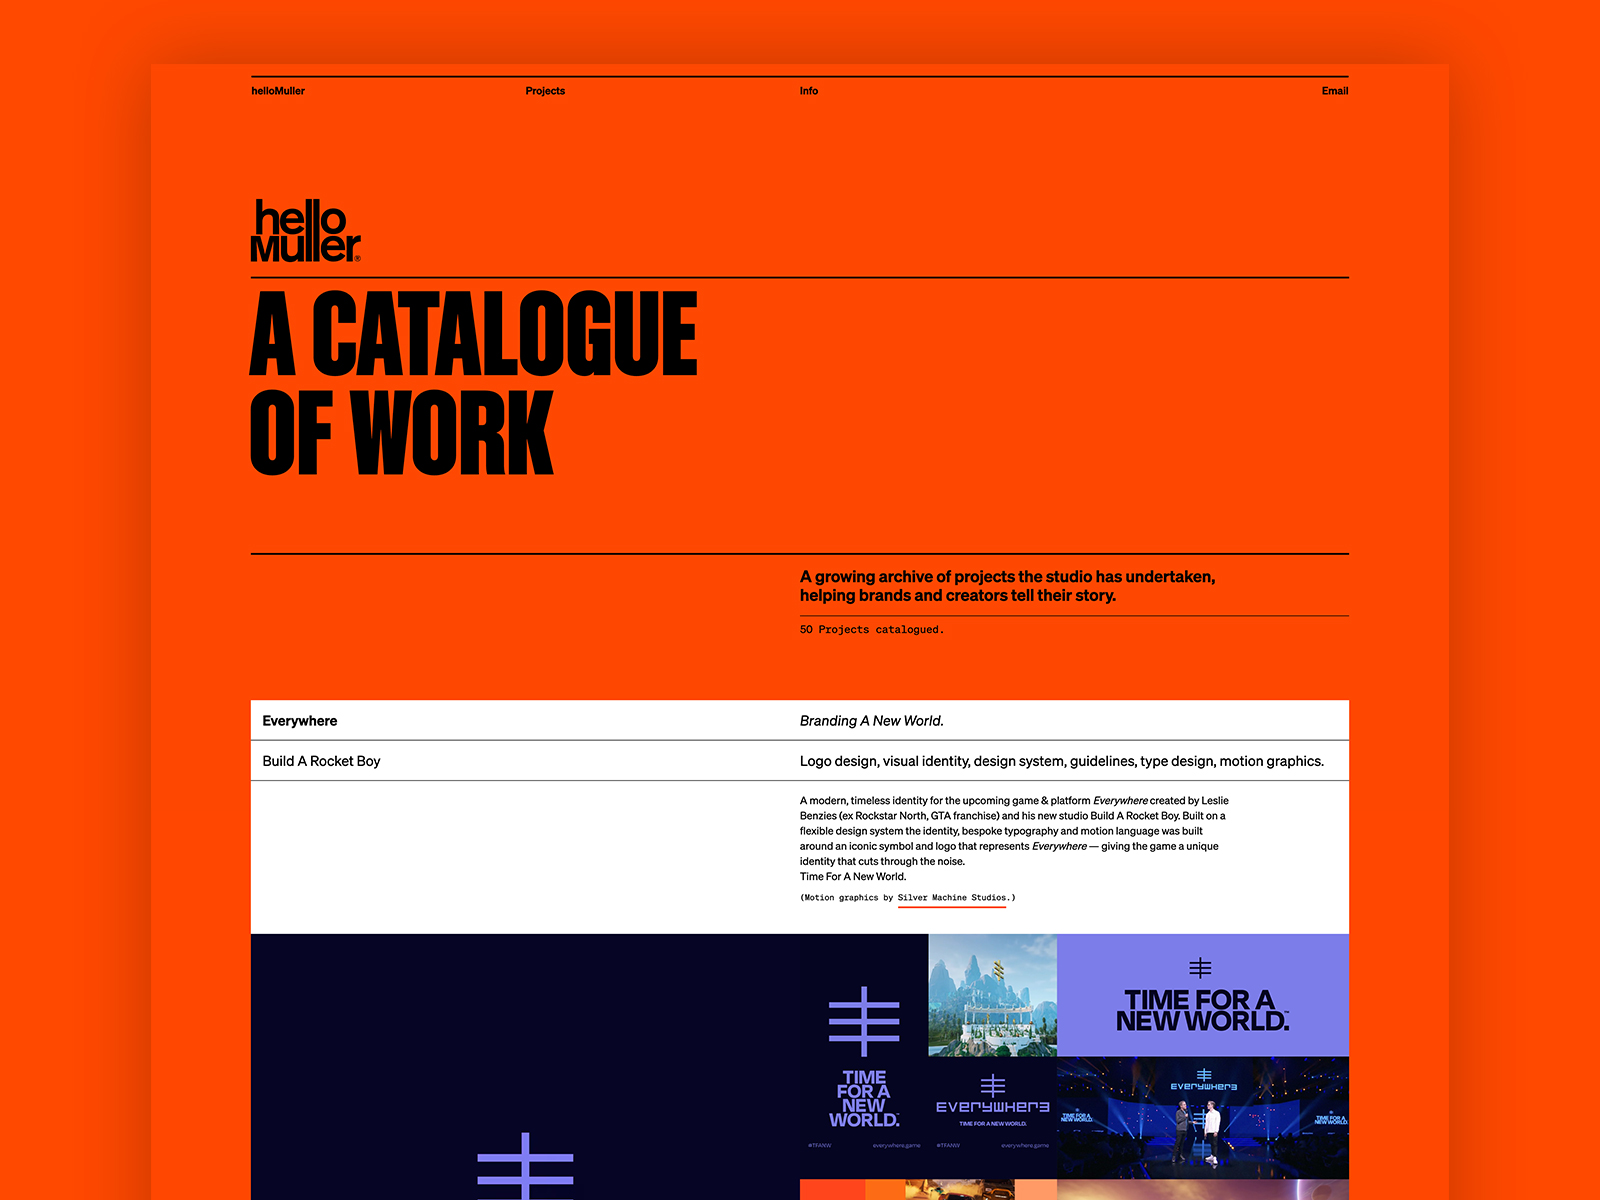 A Catalogue of Work